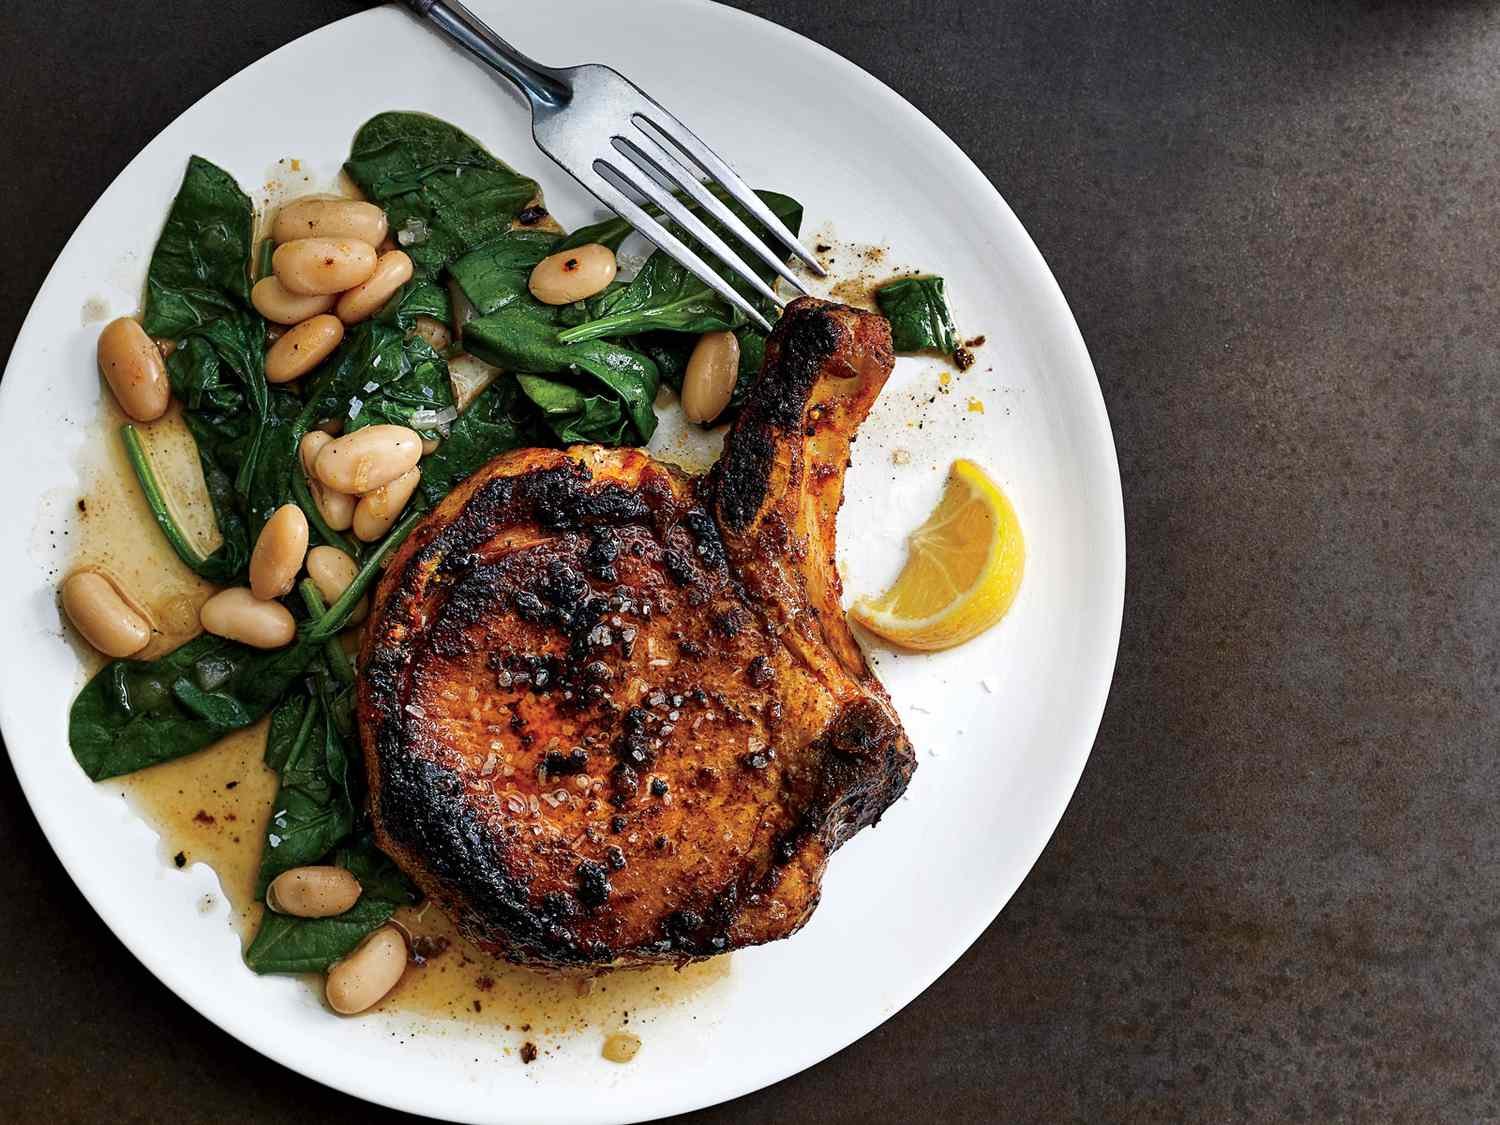 Blackened Skillet Pork Chops with Beans and Spinach